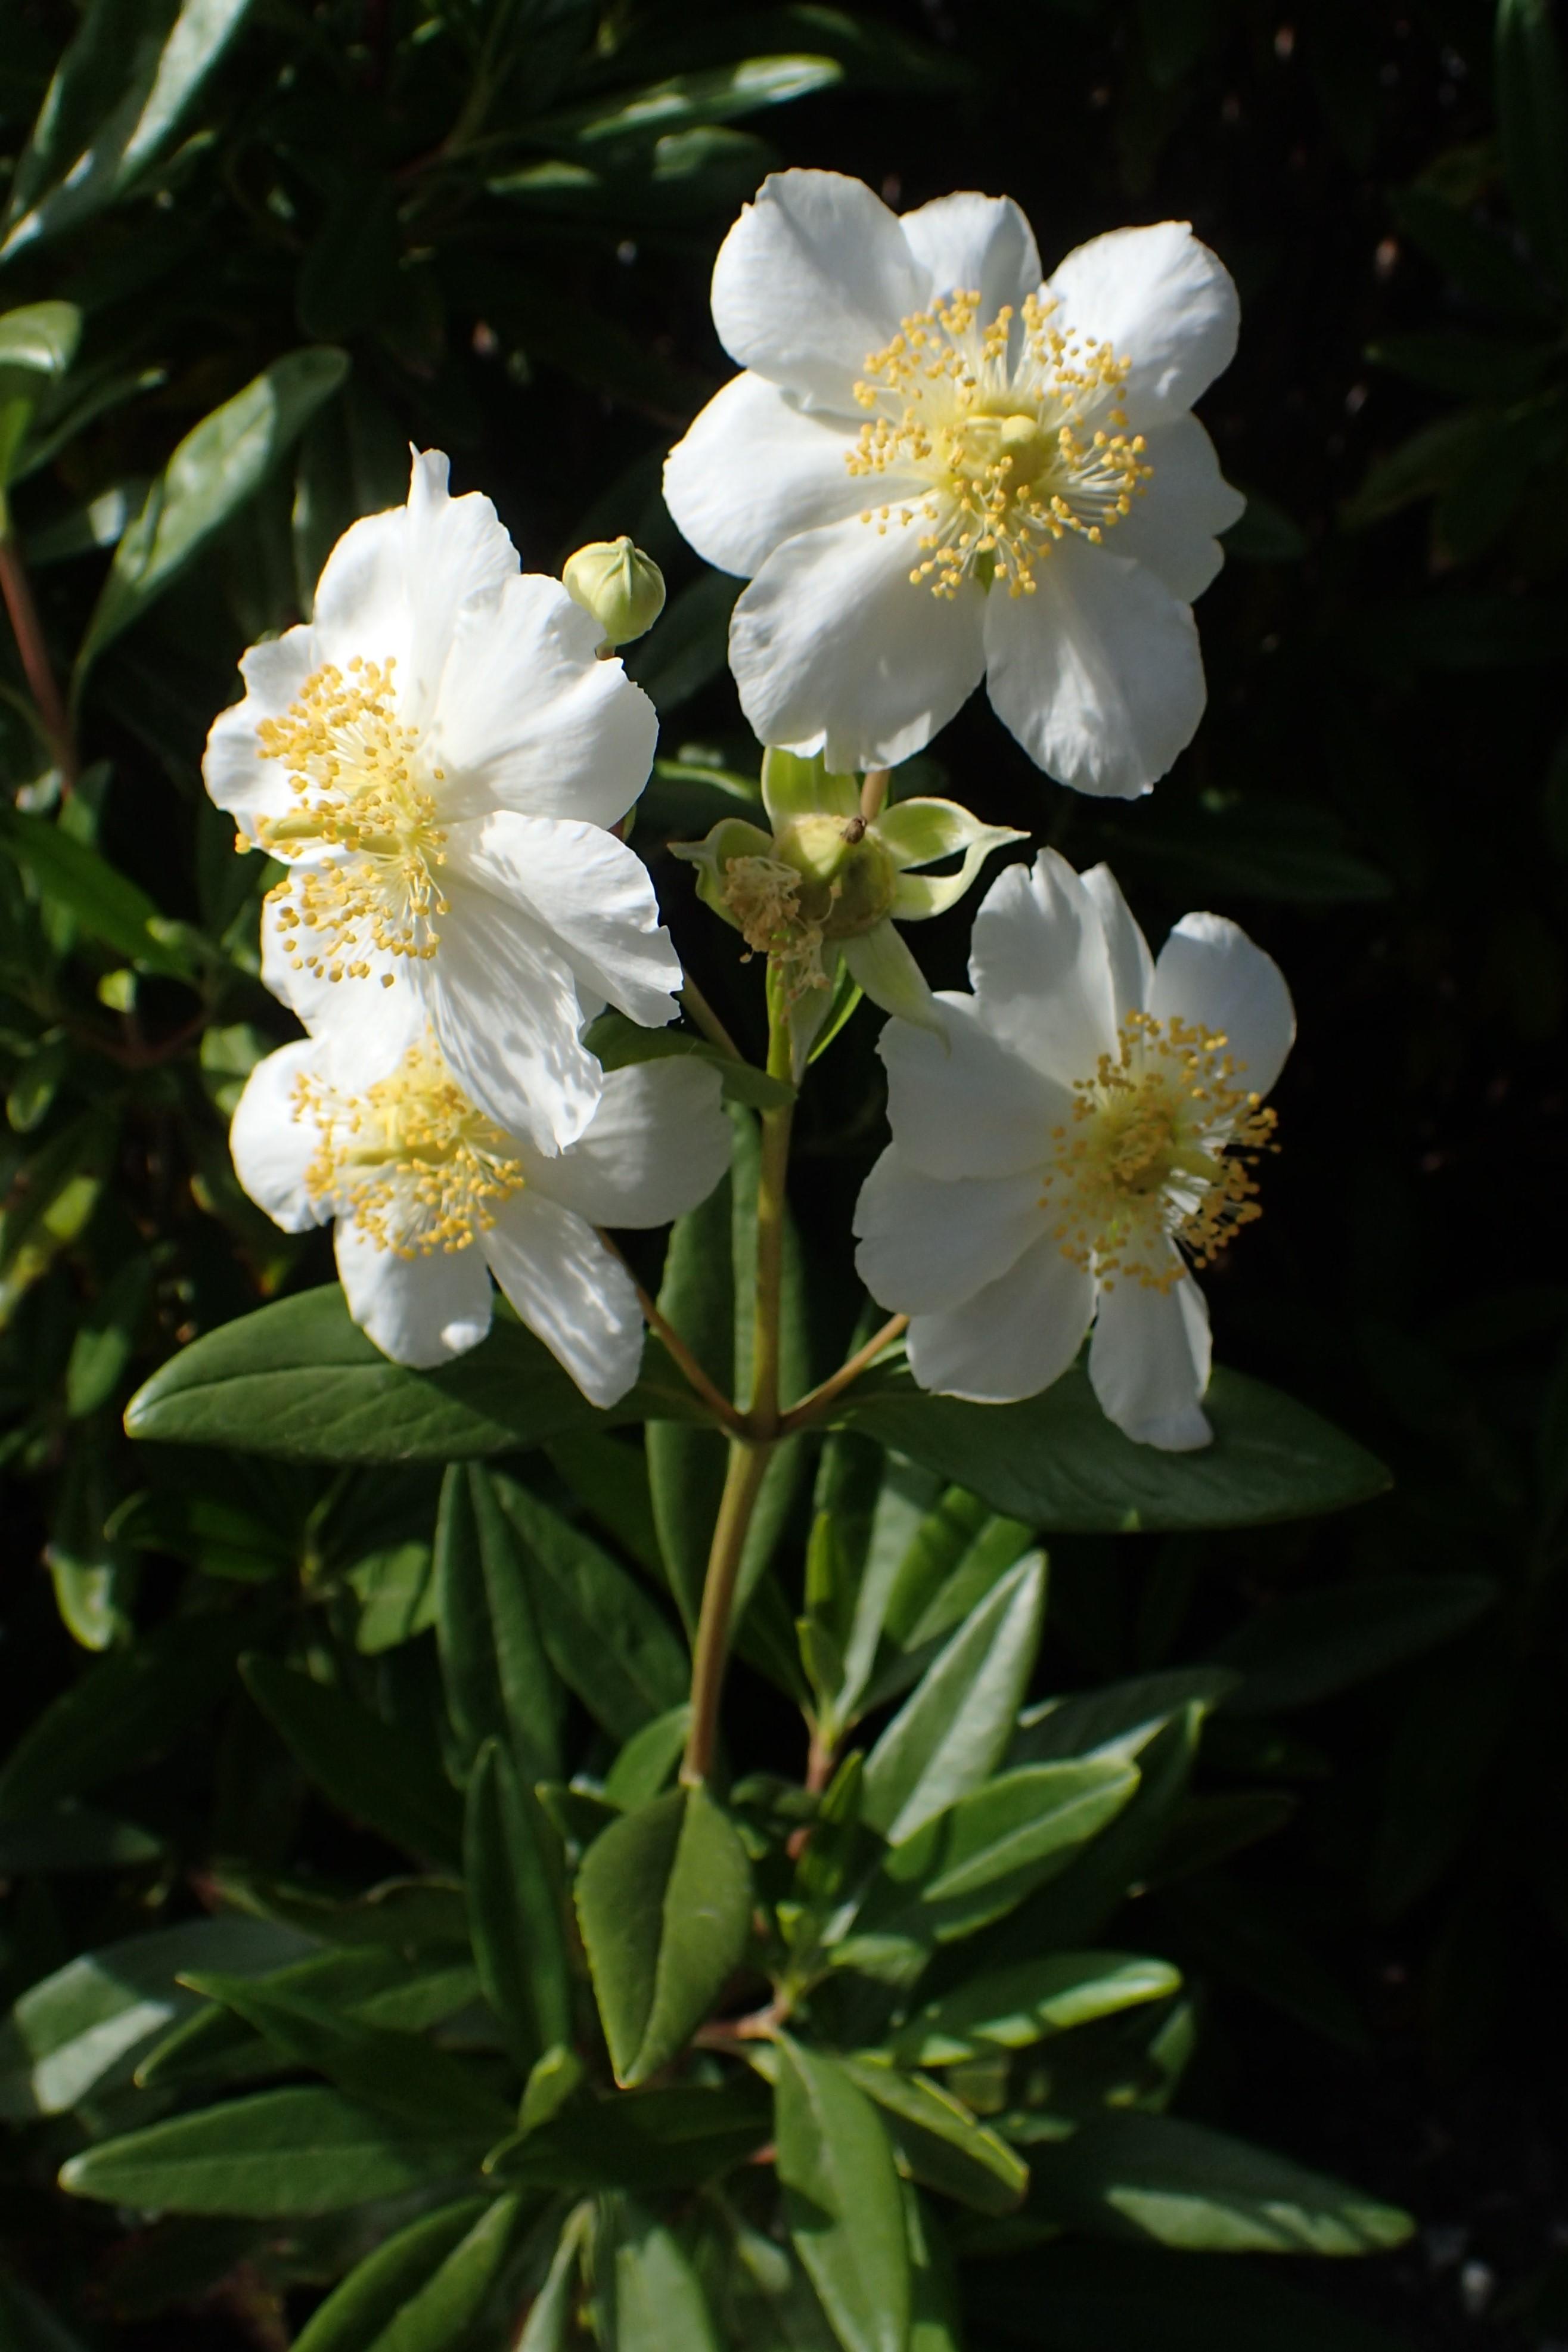 White flower with lime stigma, style and ovary, yellow stamen, lime sepal and buds, lime-beige  stems, green leaves with yellow midrib and veins.